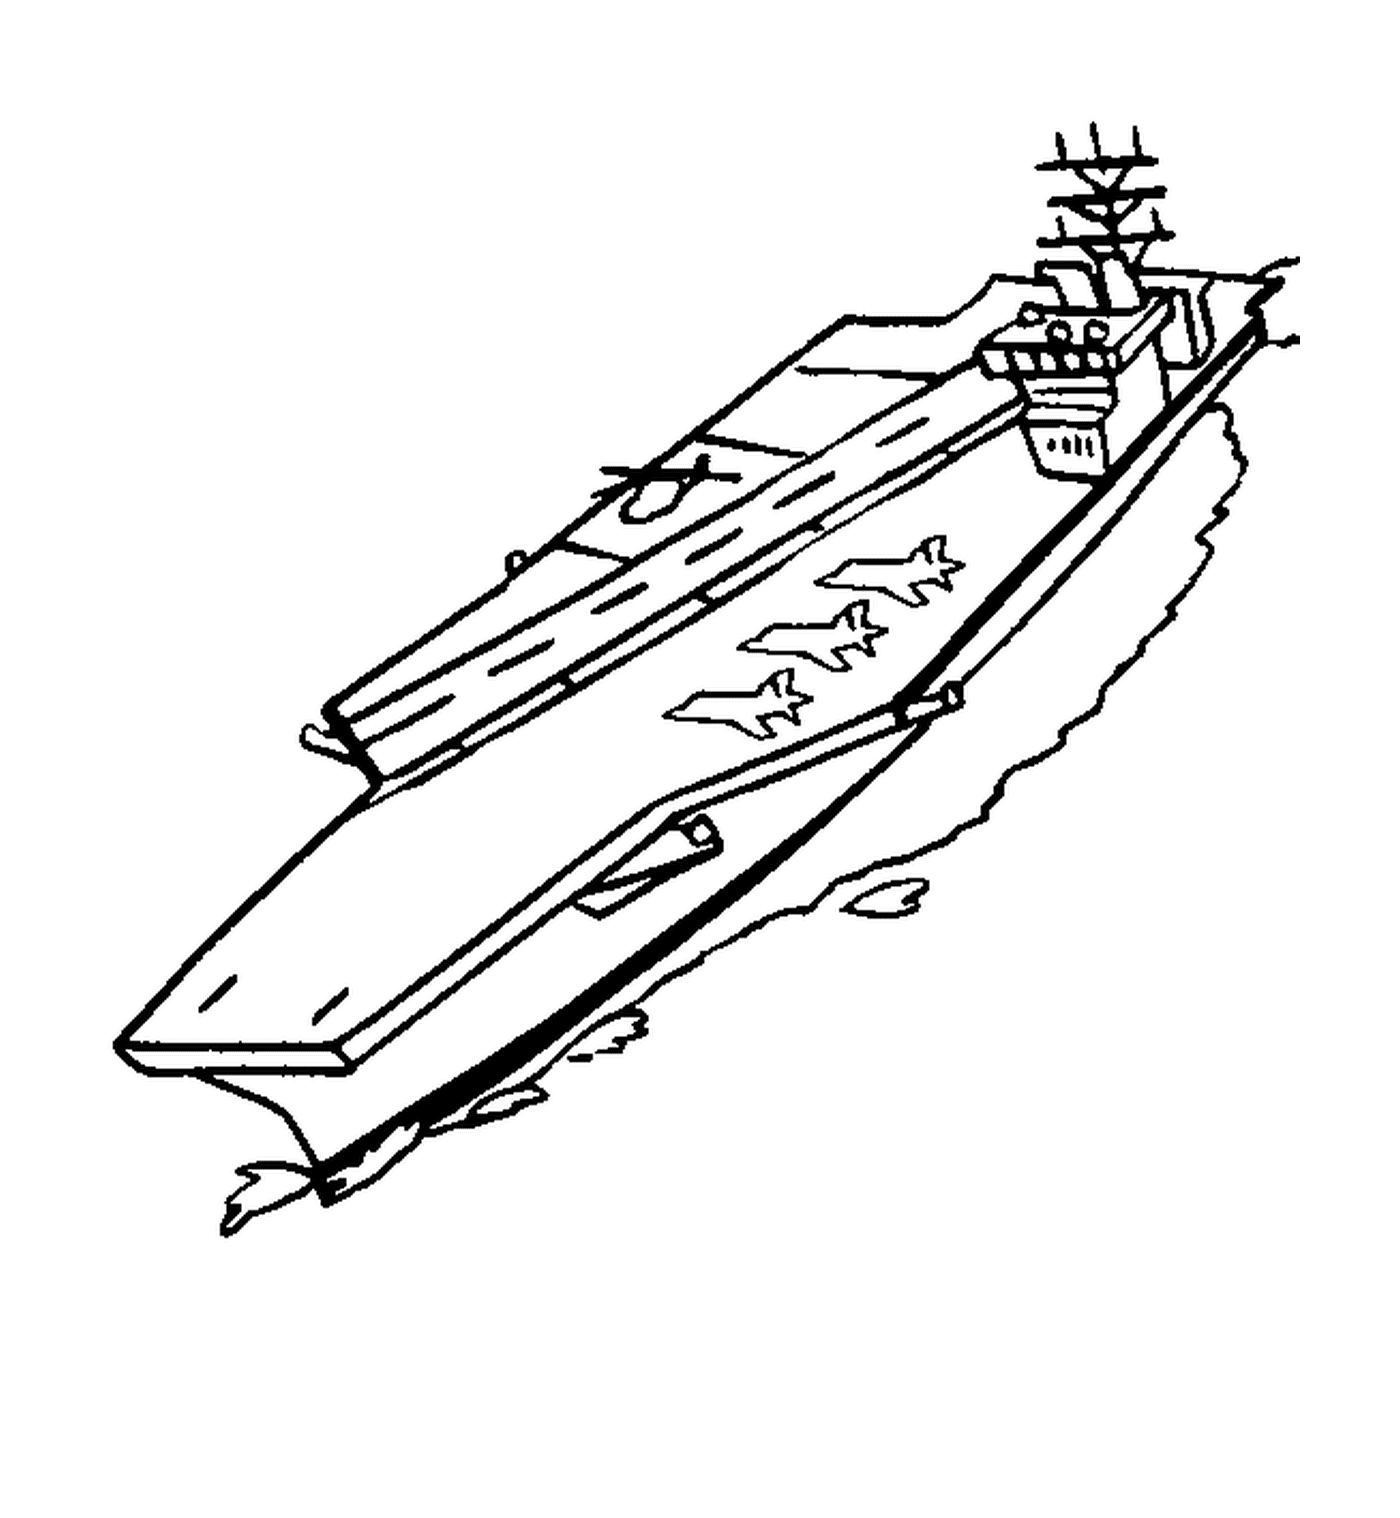  A boat 